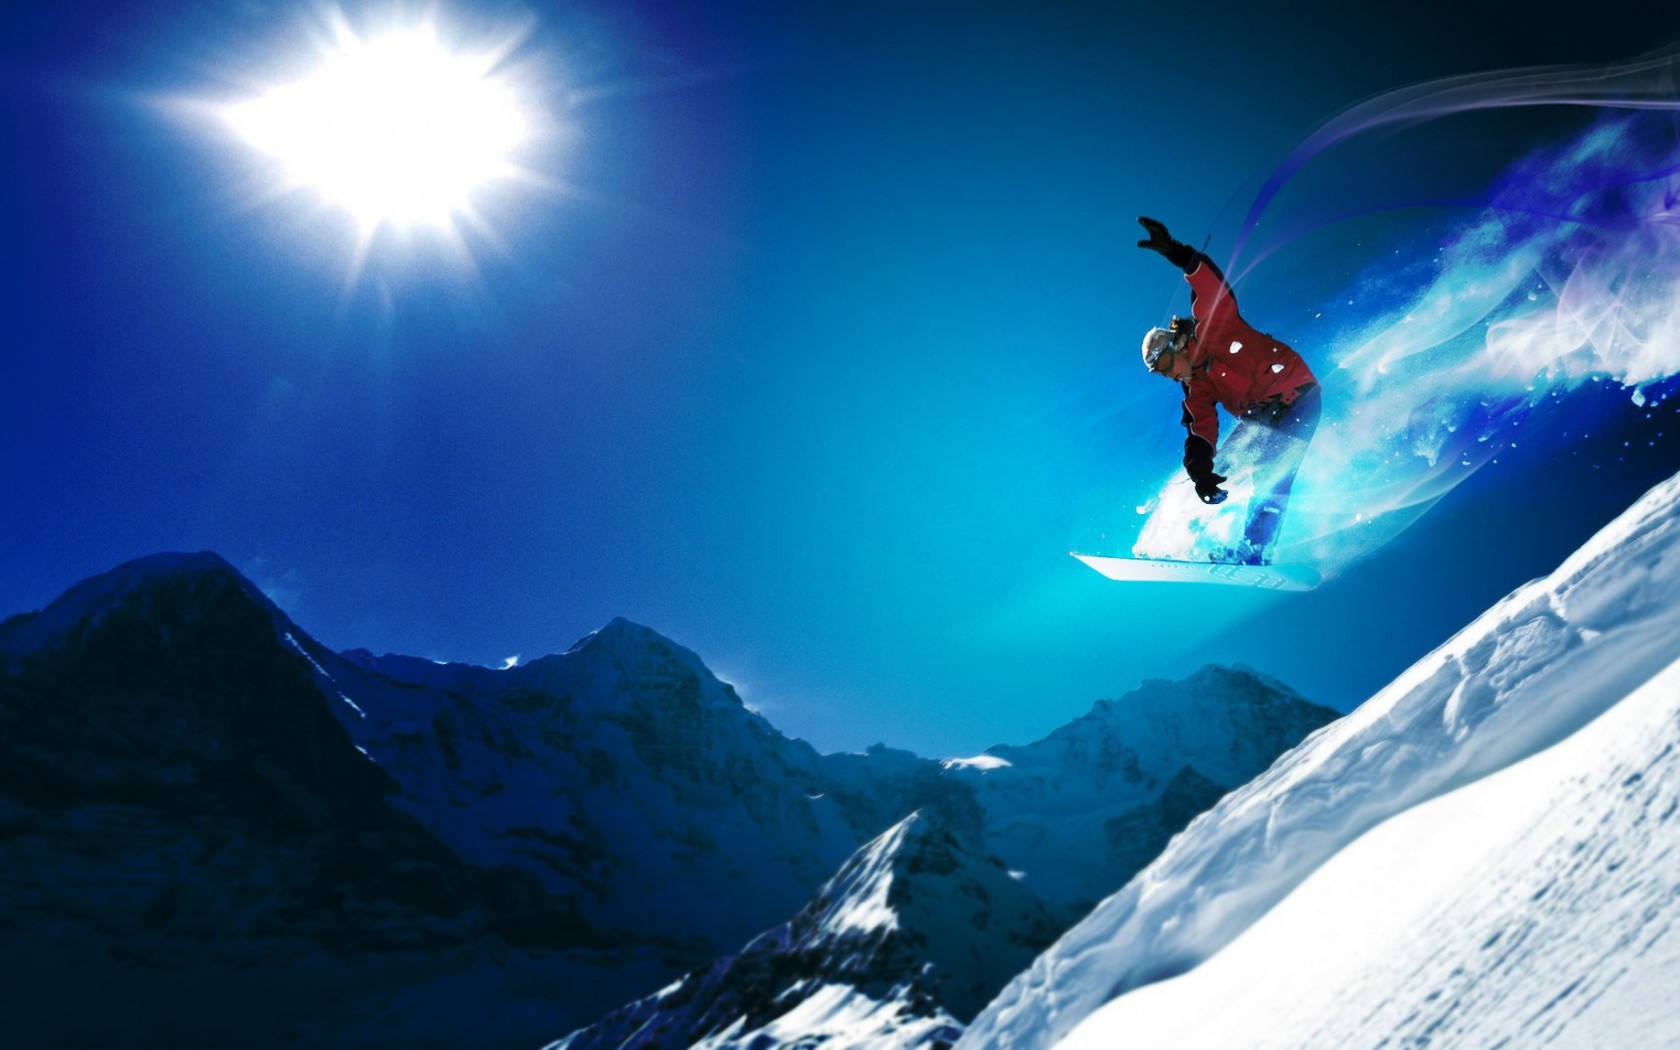 Snowboard Wallpaper And Image Pictures Photos